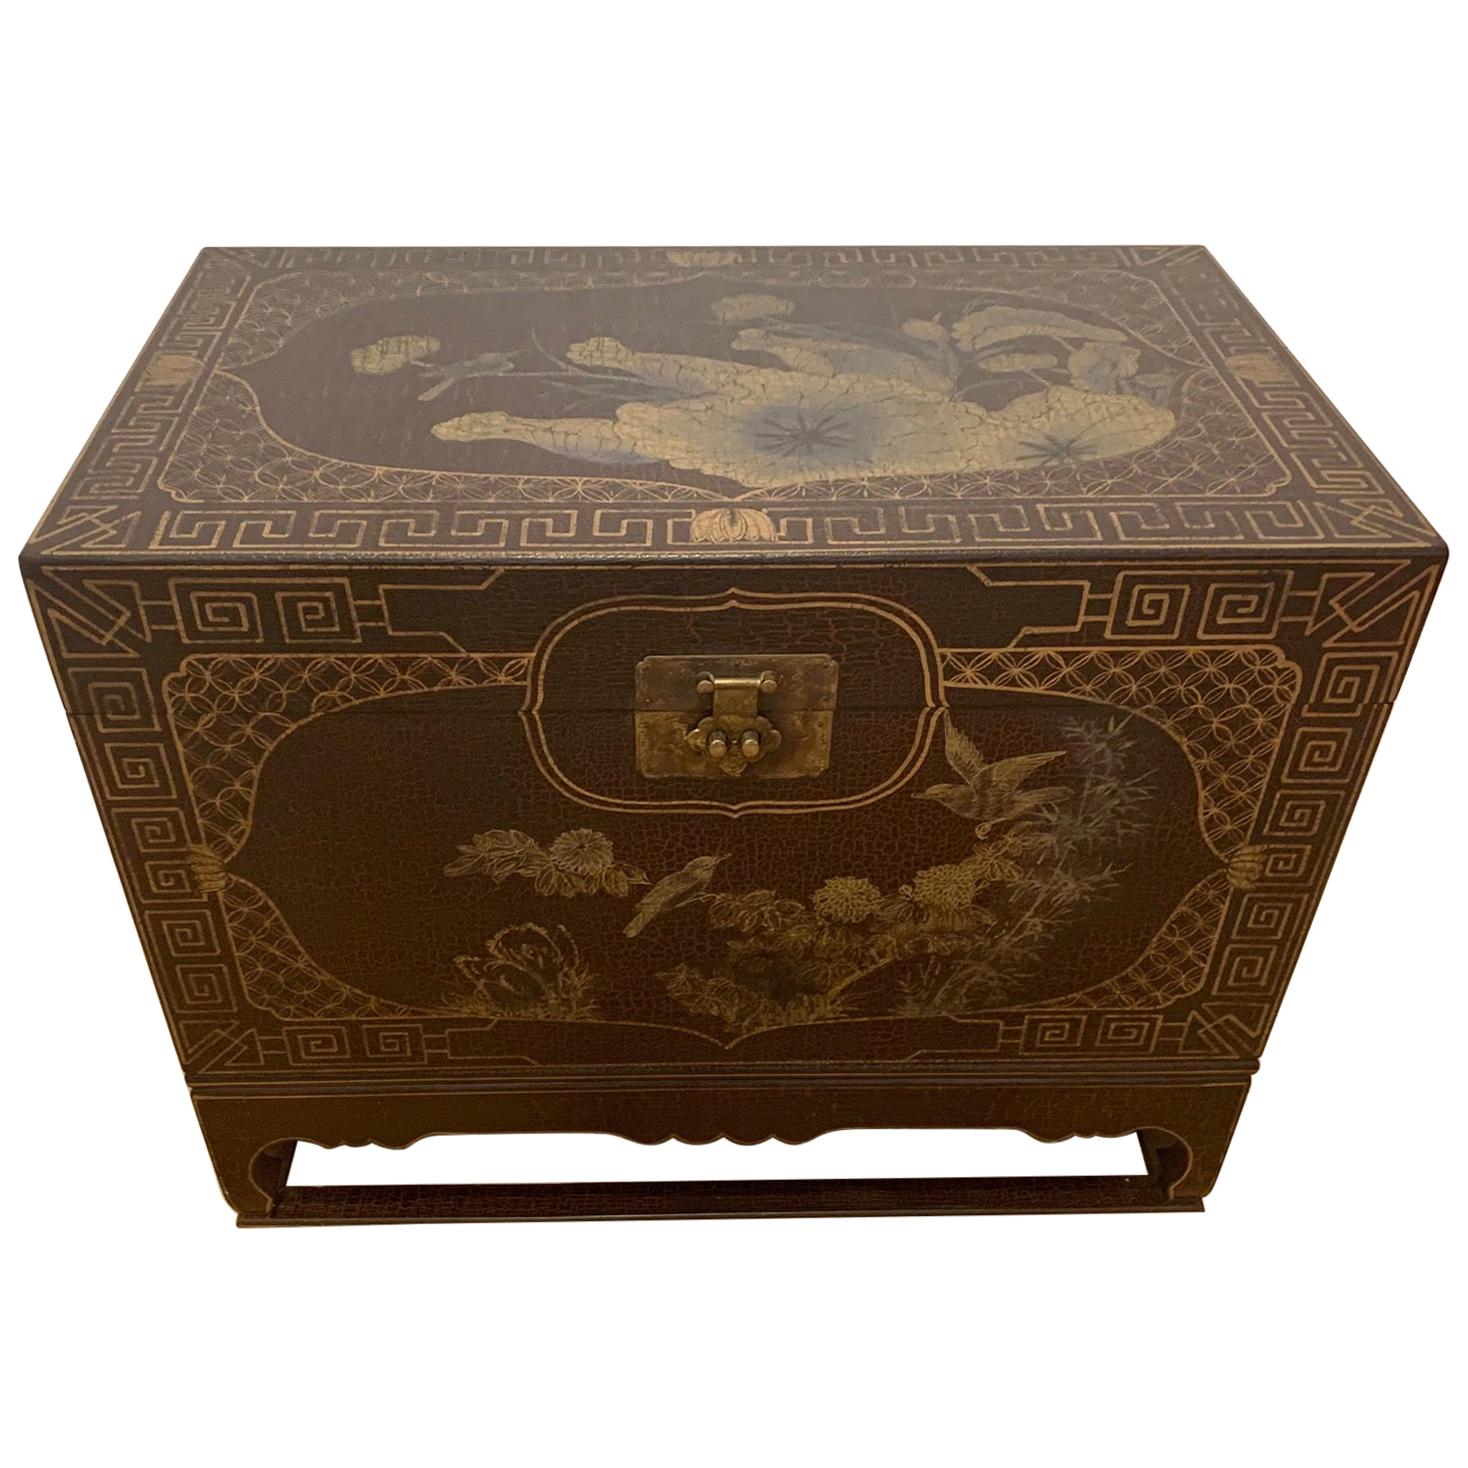 Highly Decorative Chinoiserie Style Painted Trunk on Stand